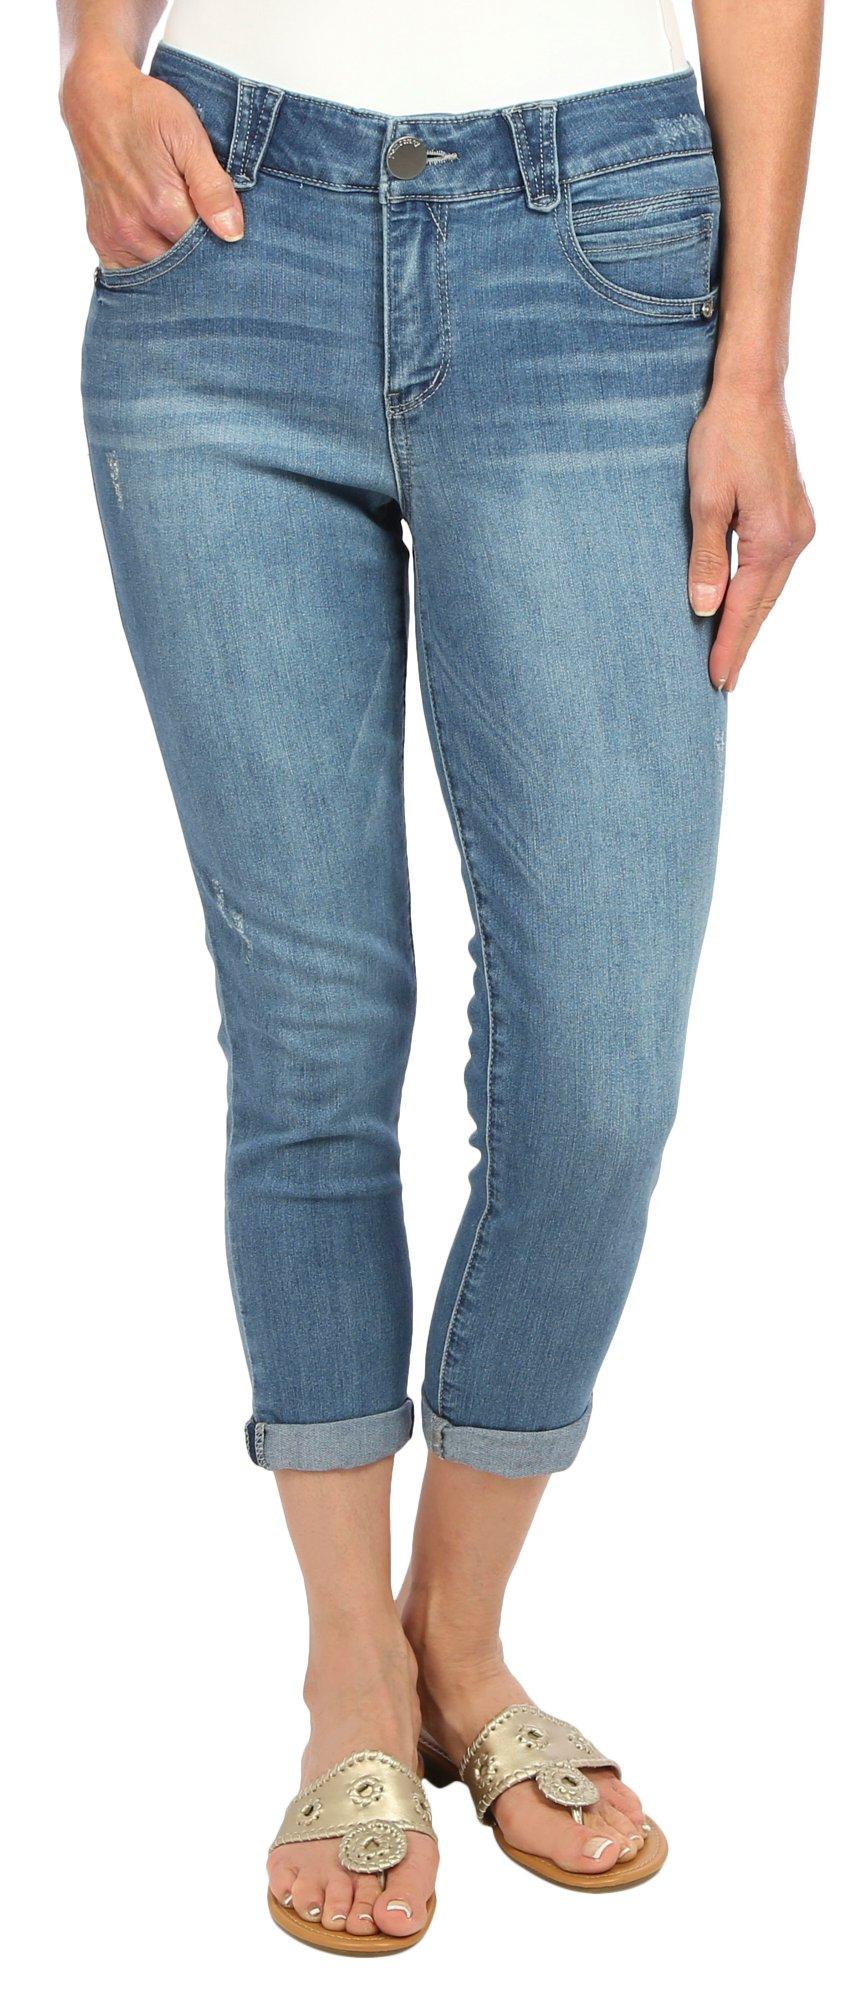 Democracy Petite 23.5 in. Ab Solution Ankle Skimmer Jeans